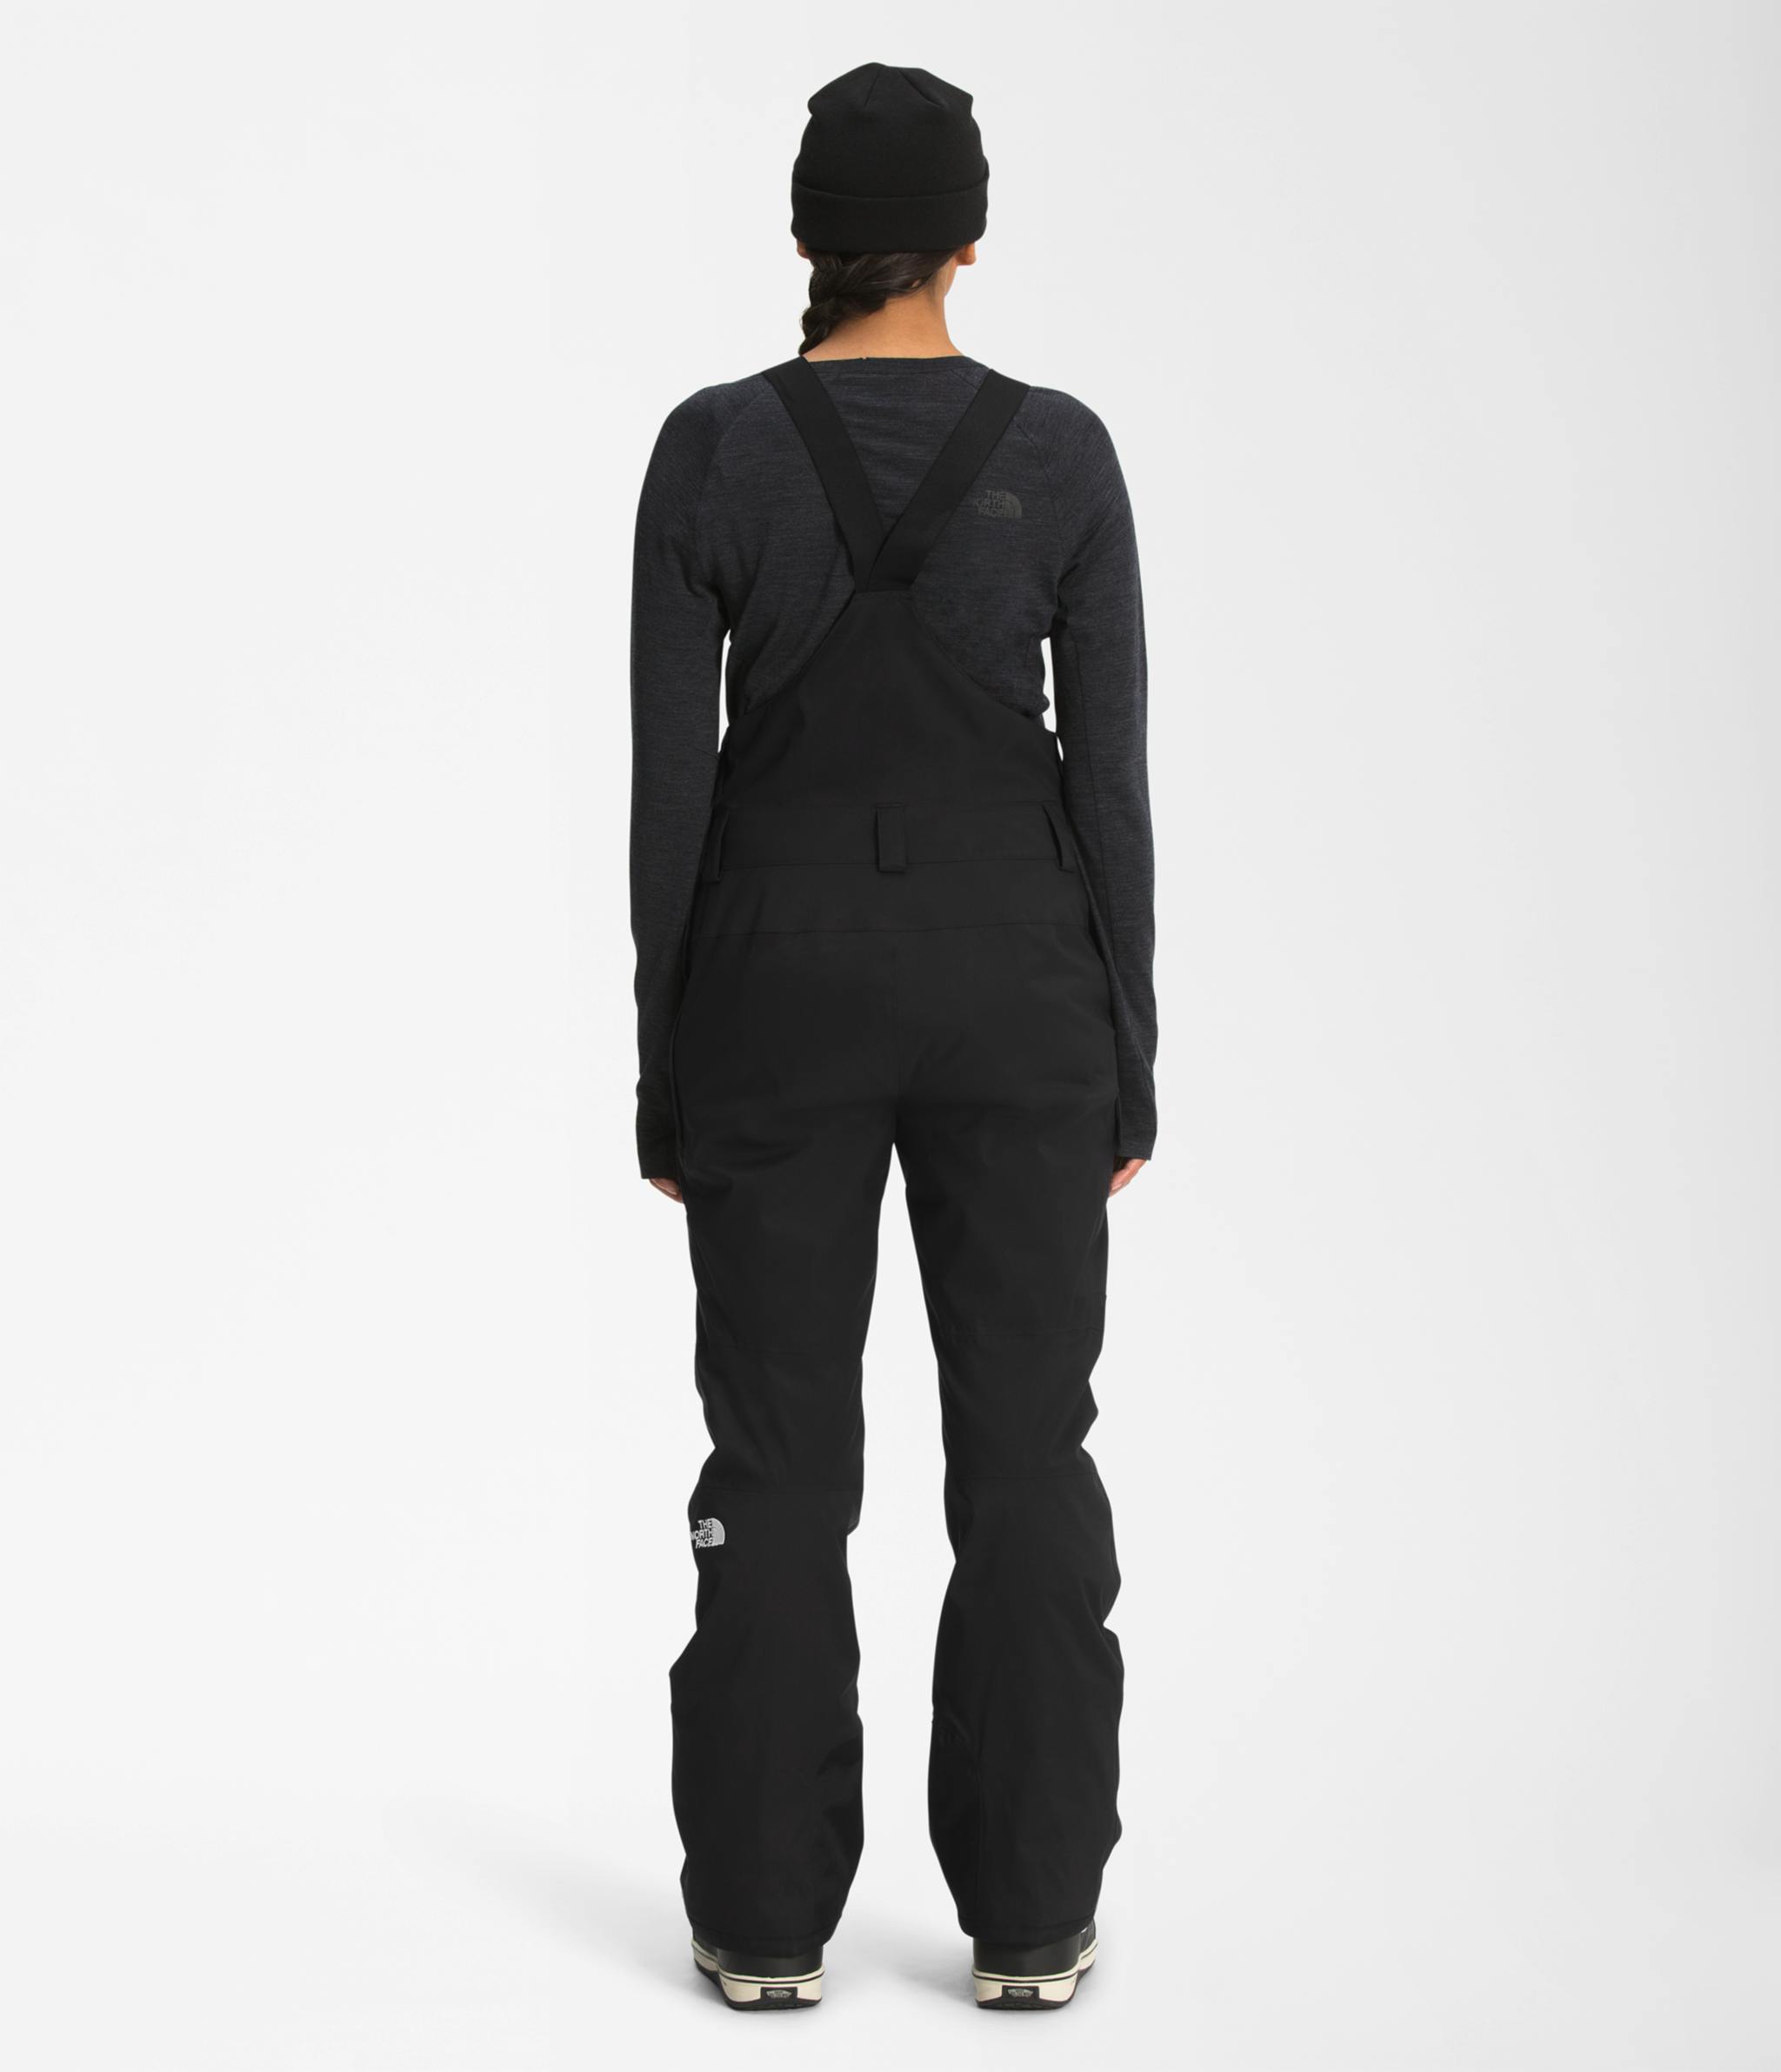 The North Face Women's Freedom Insulated Bib Pants